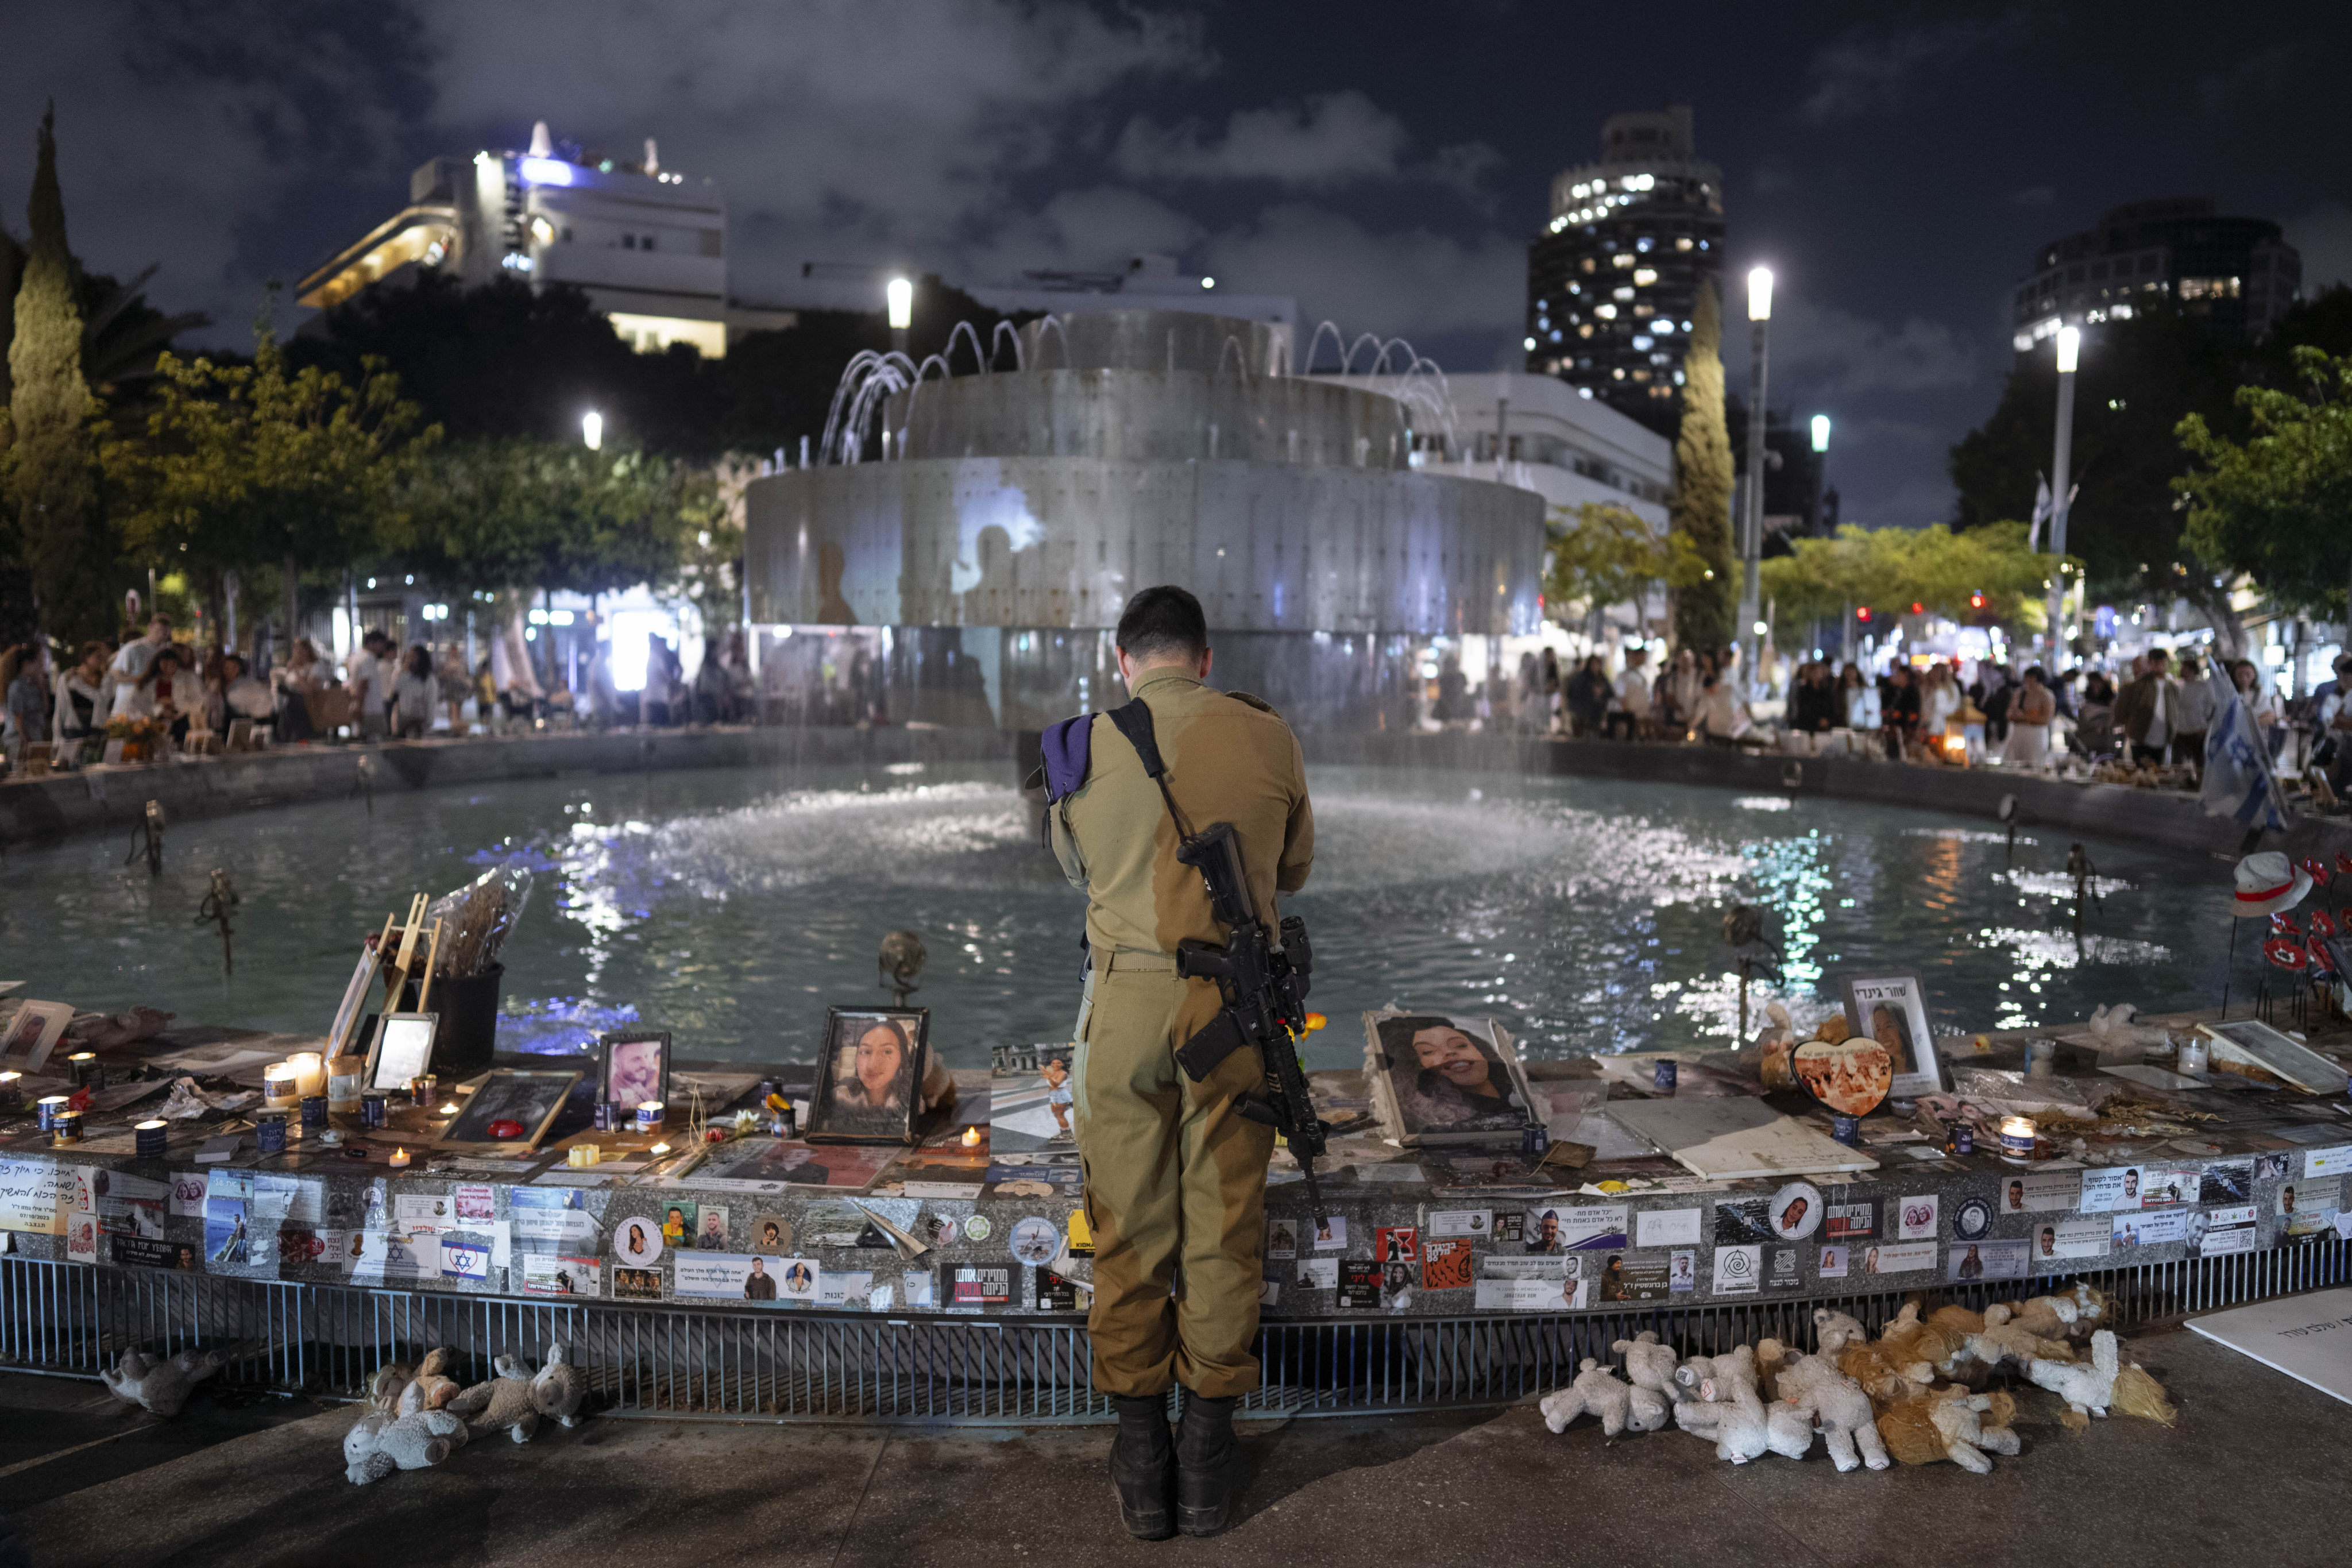 An Israeli soldier in Tel Aviv pays respect at a memorial for victims of the bloody October 7 attack. Photo: AP